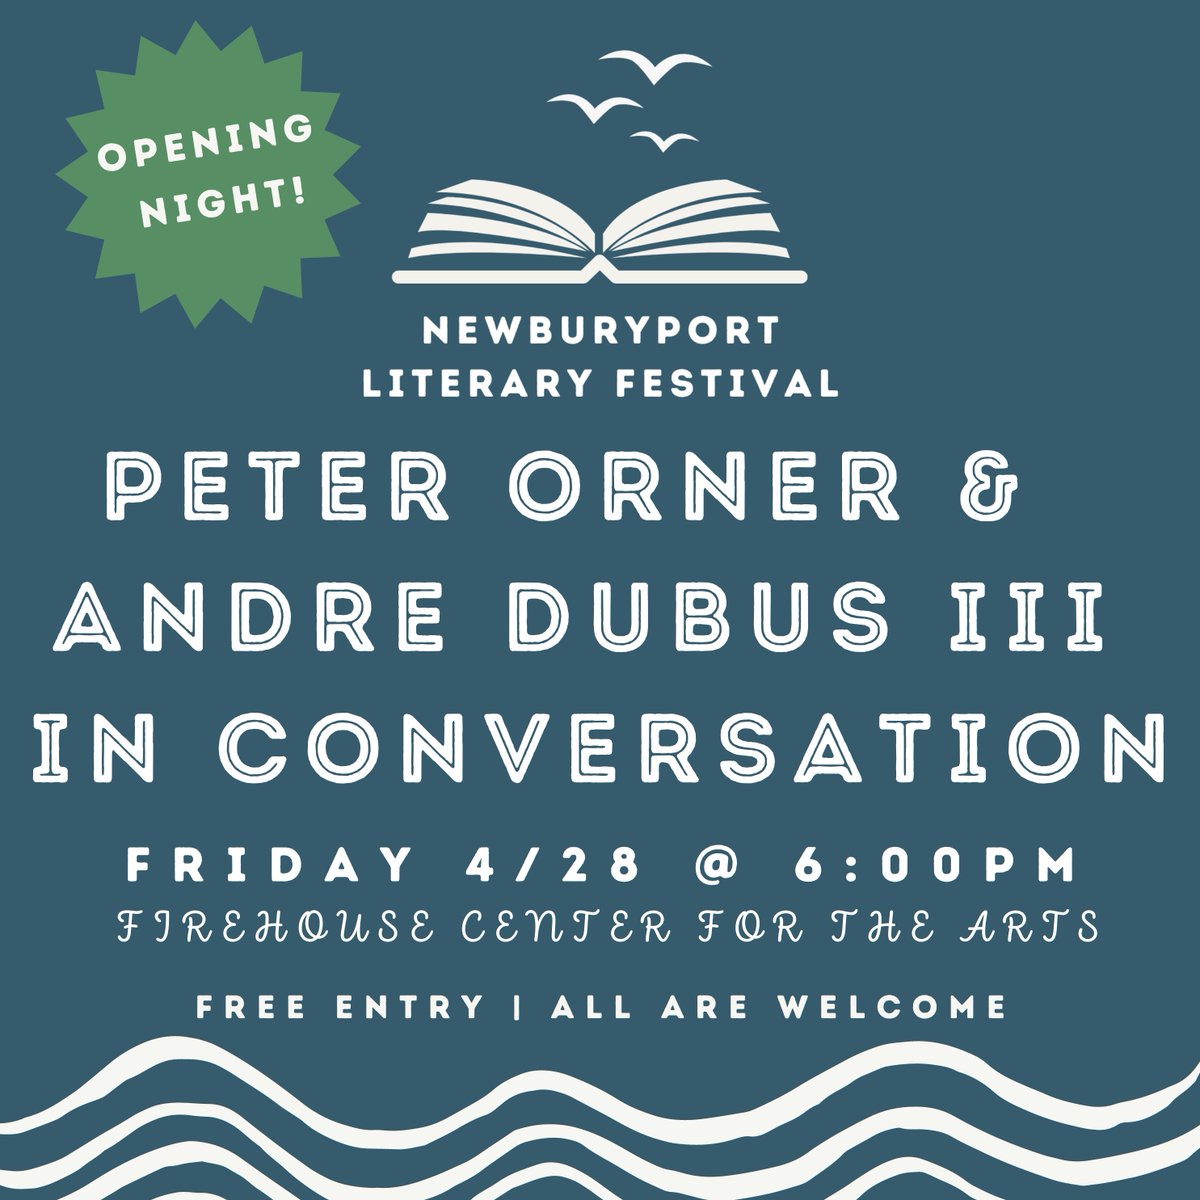 Join us this Friday, for opening night of the 18th annual Newburyport Literary Festival! This year's honoree, Peter Orner will join Andre Dubus III in conversation at 6PM to kick things off at the Firehouse Center for the Arts. Seats are first come, first served!